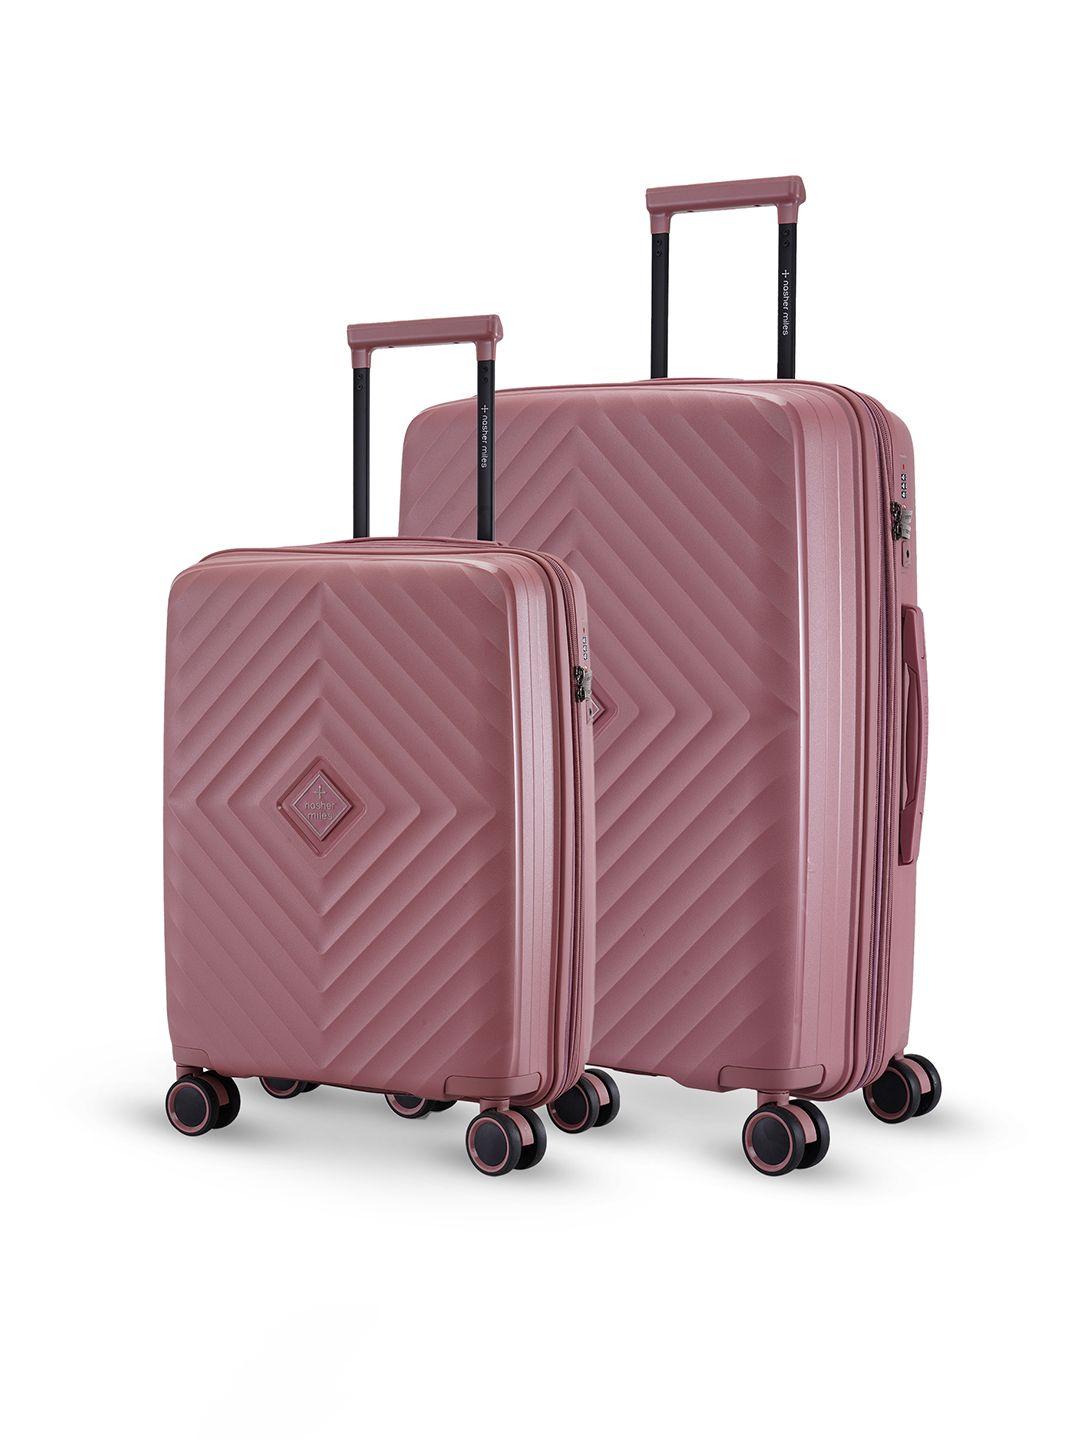 nasher-miles-set-of-2-hard-sided-textured-trolley-suitcases